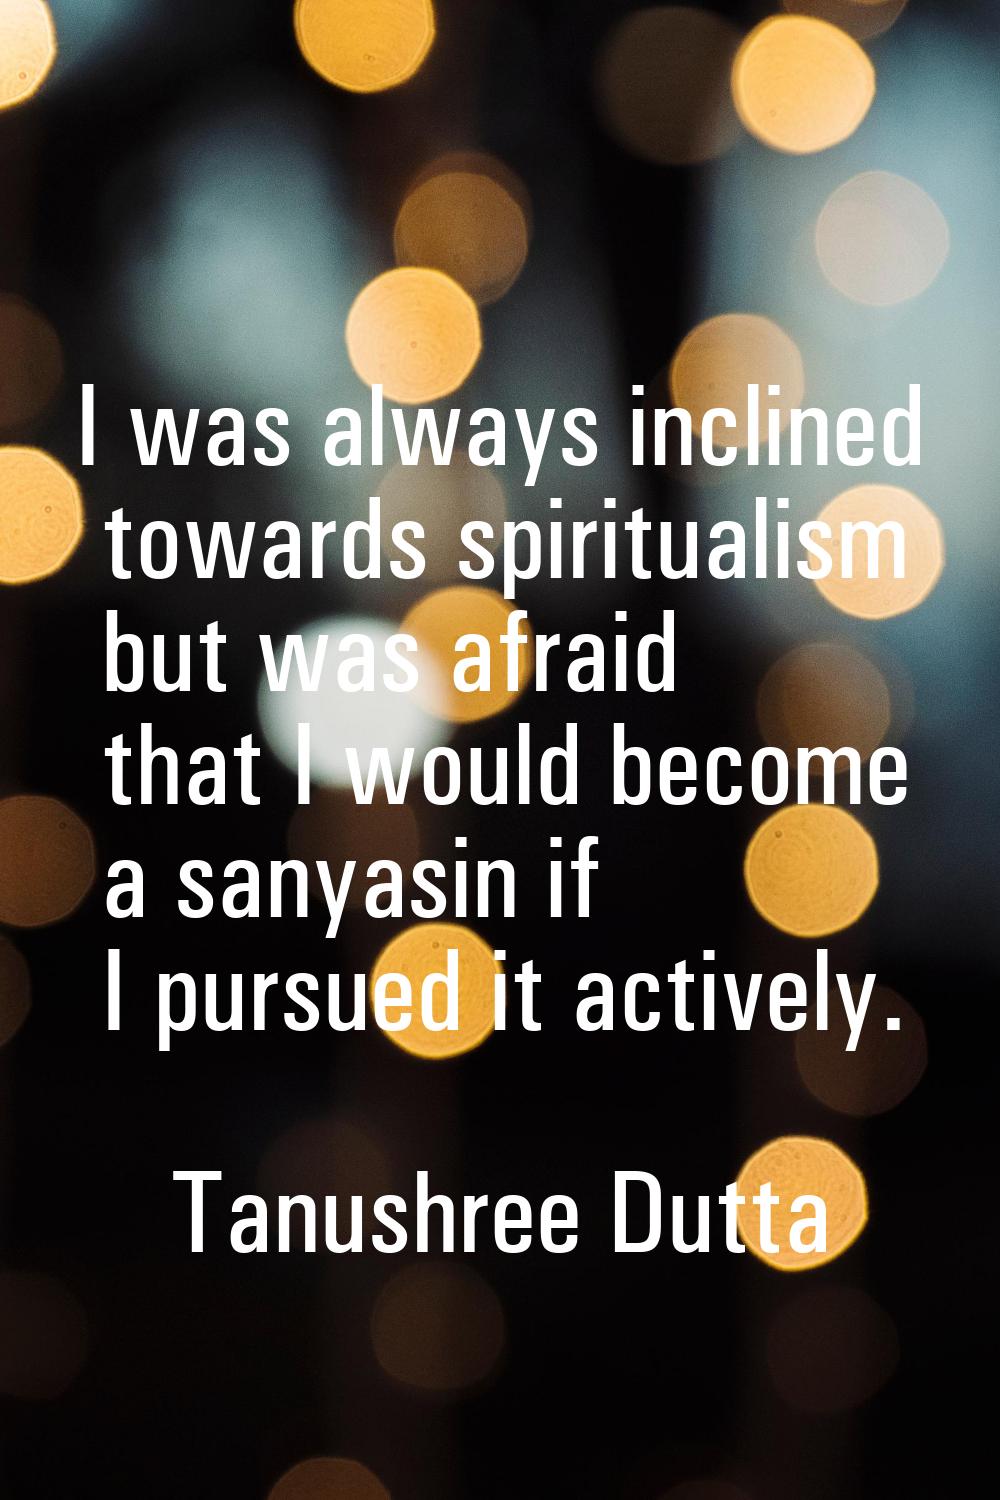 I was always inclined towards spiritualism but was afraid that I would become a sanyasin if I pursu